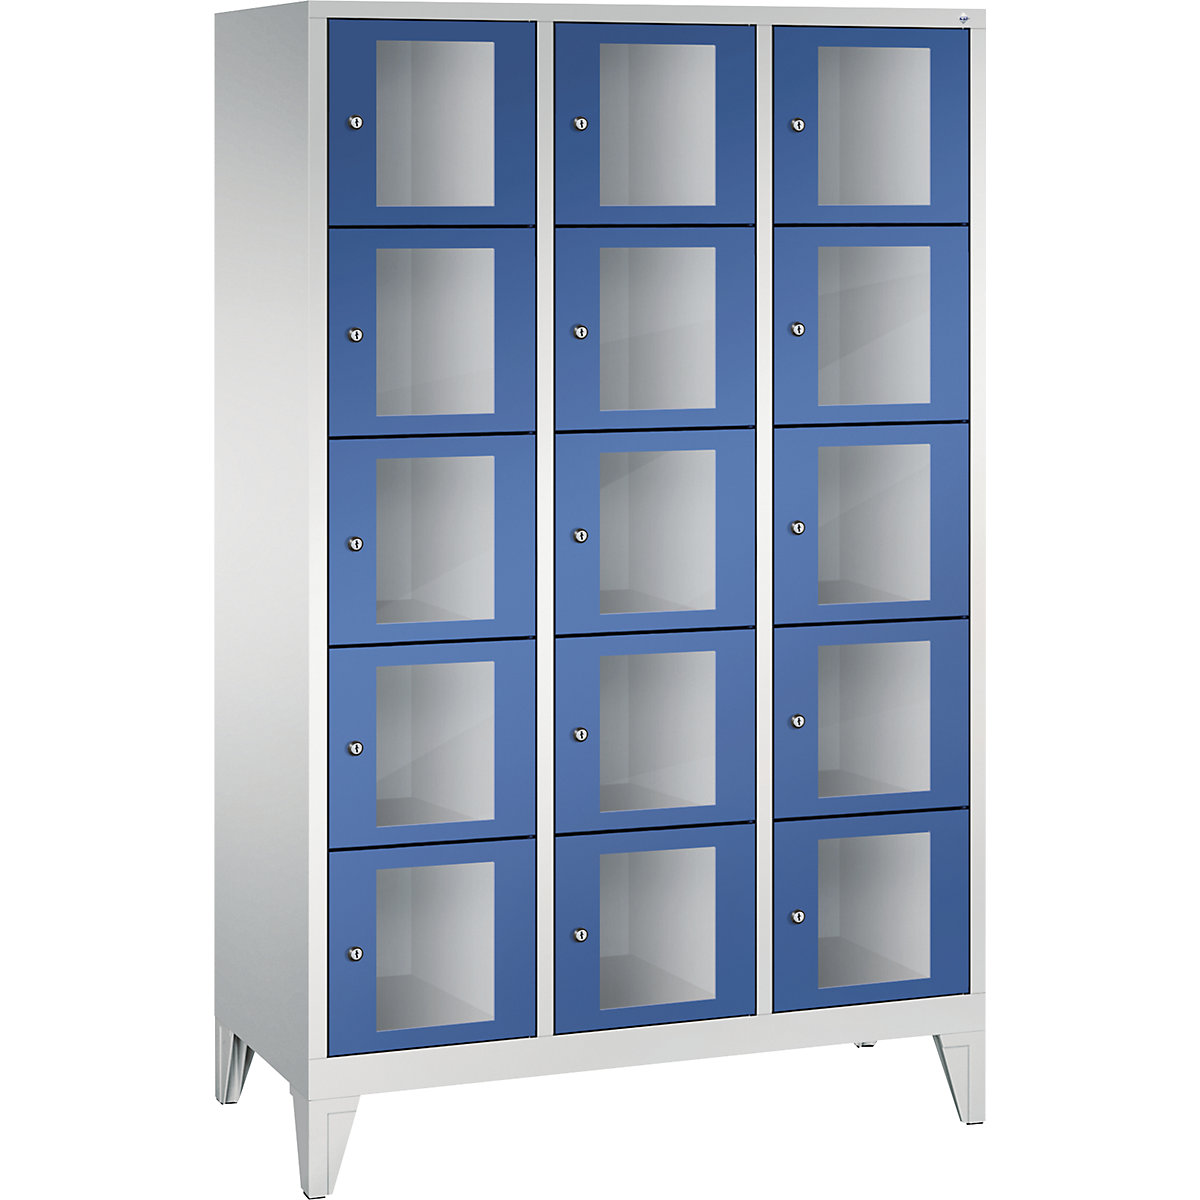 C+P – CLASSIC locker unit, compartment height 295 mm, with feet, 15 compartments, width 1200 mm, gentian blue door